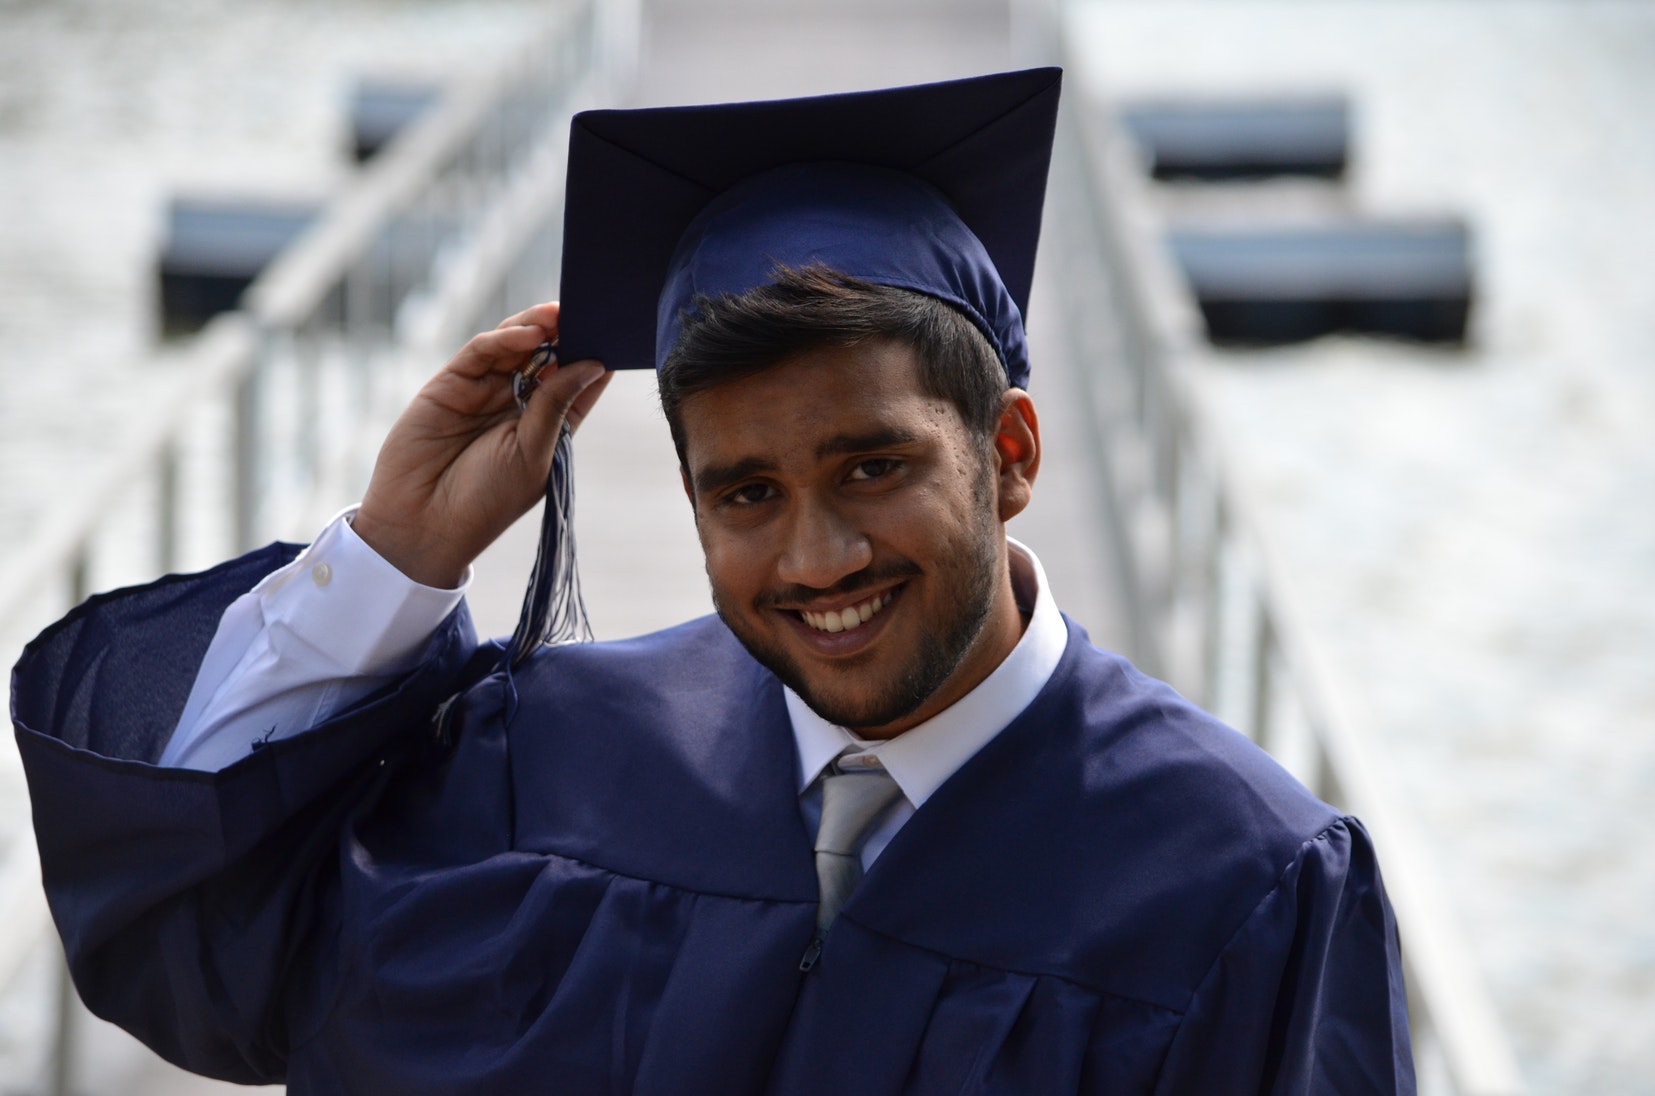 A student in his graduation gown holding his graduation hat.